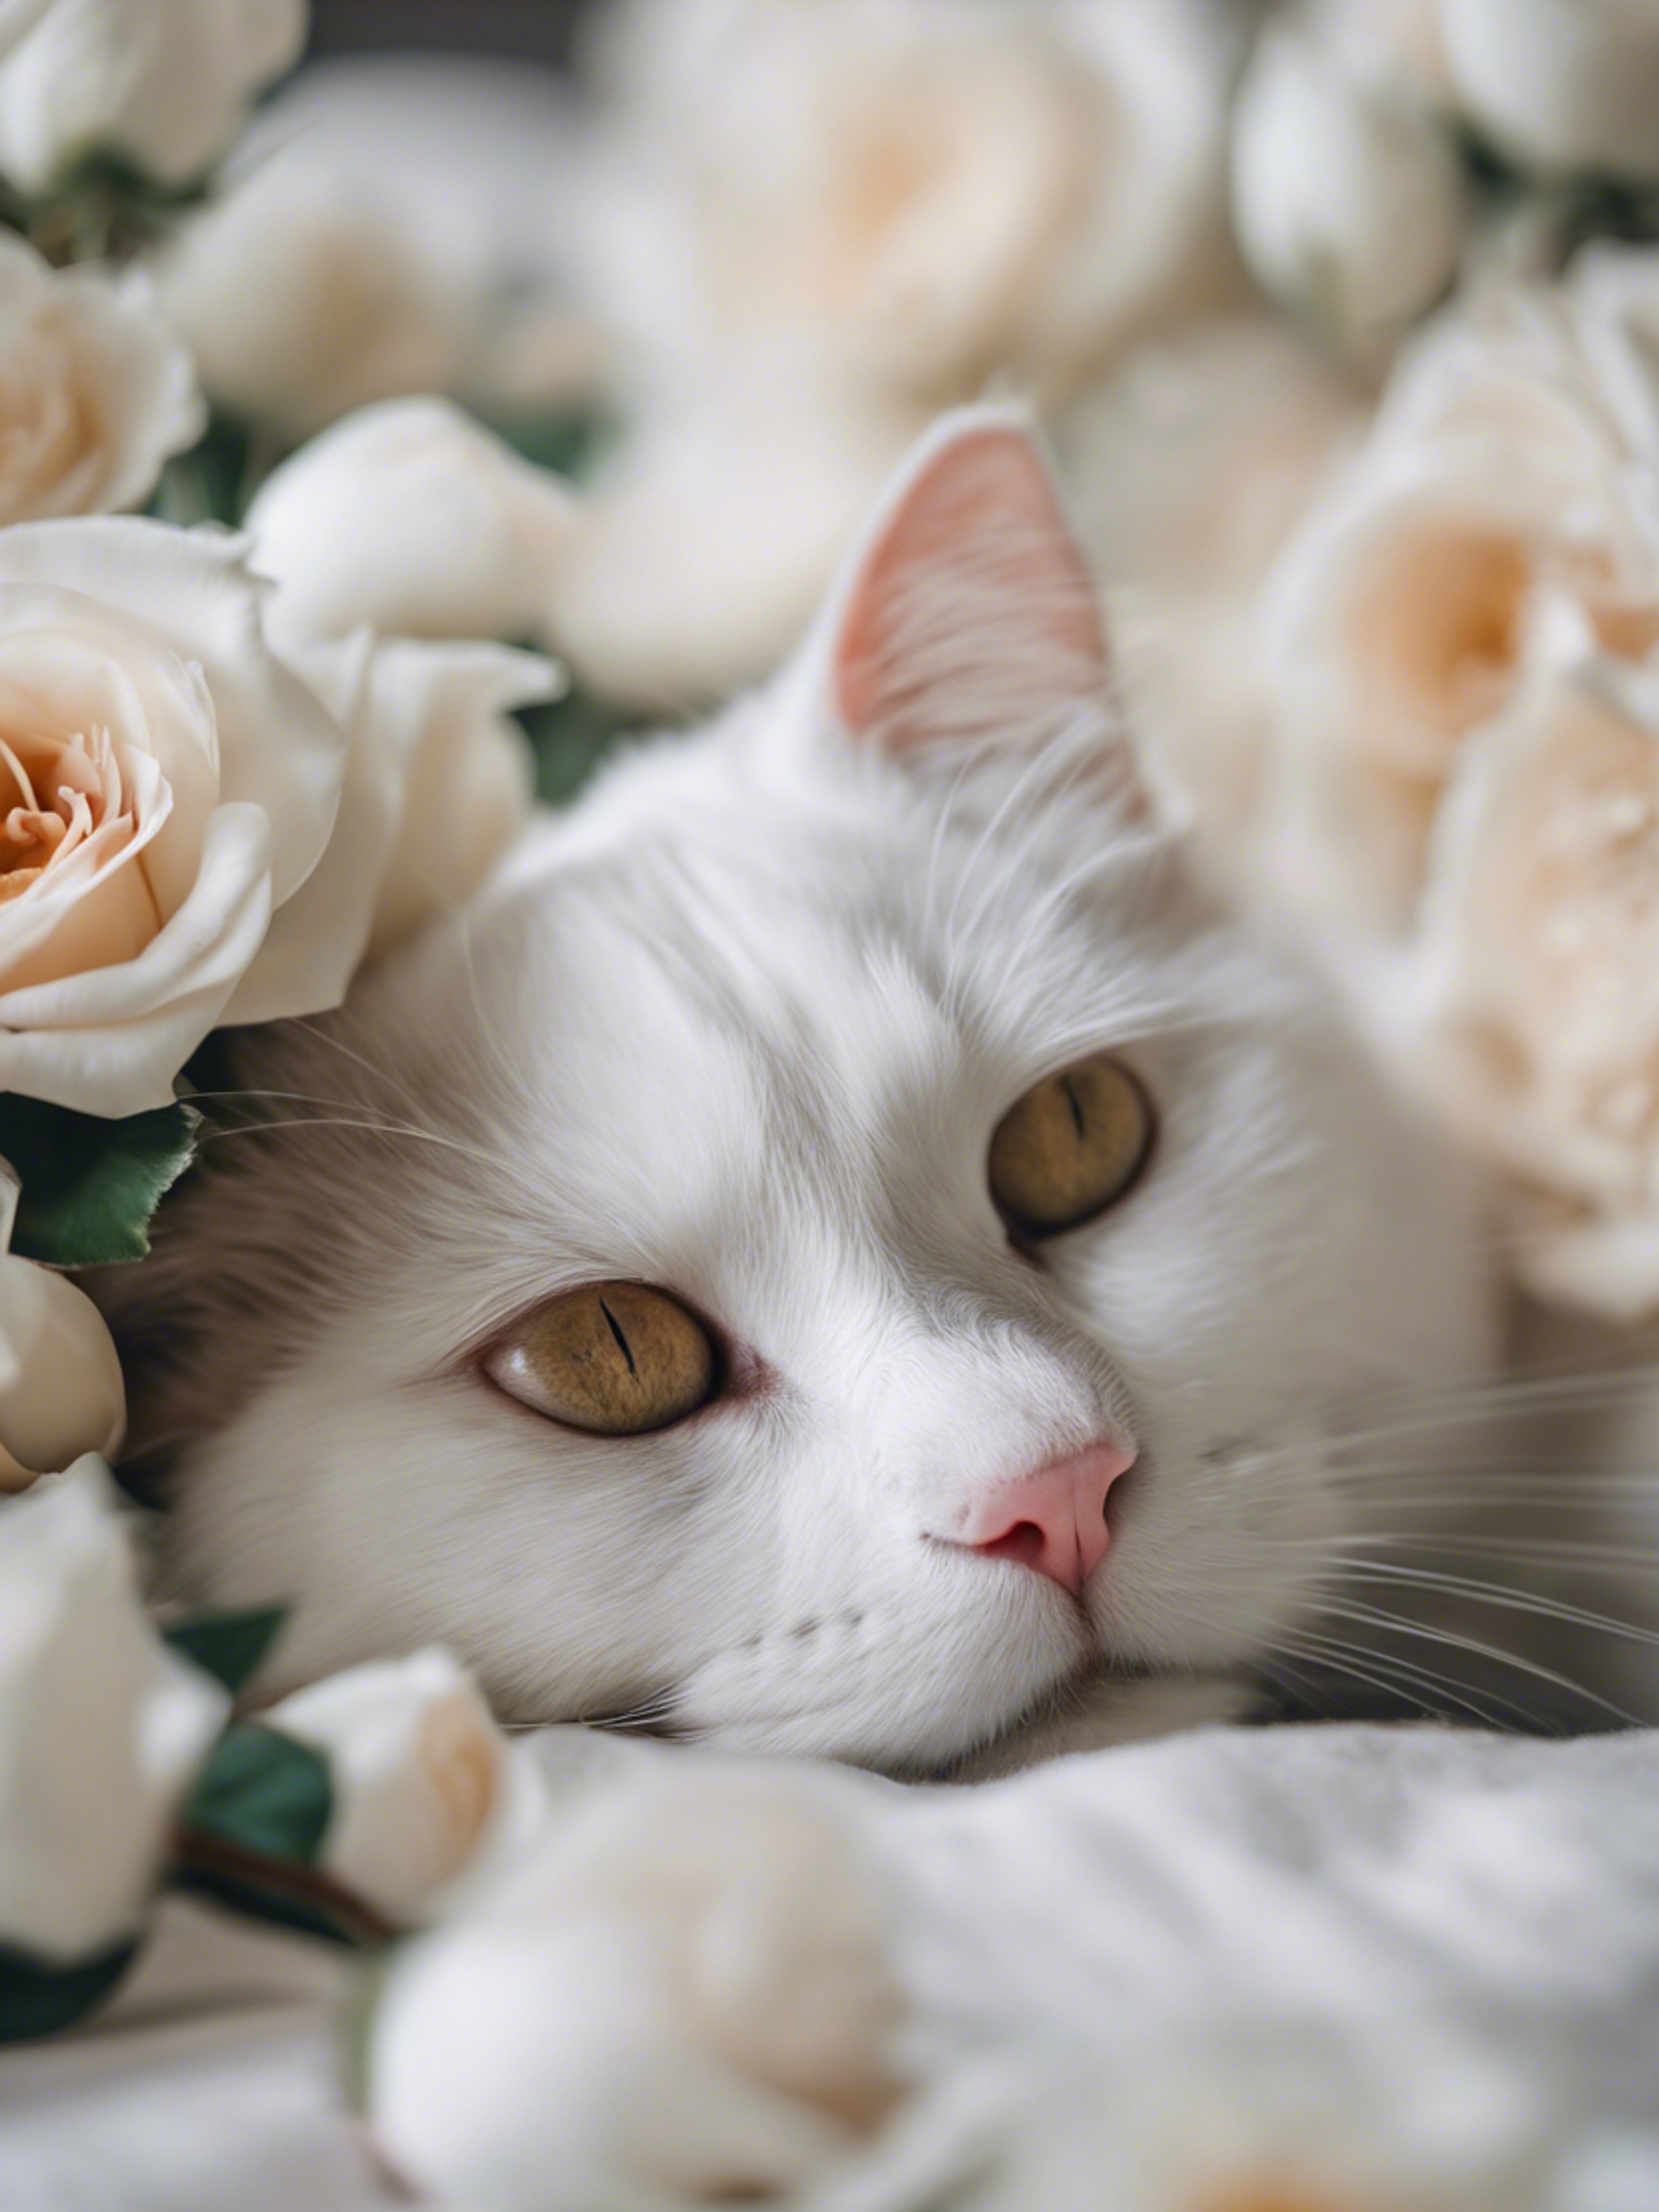 A picturesque content white cat sleeping amidst a bed of white roses. Tapeta na zeď[21bd514b84c74c92a754]